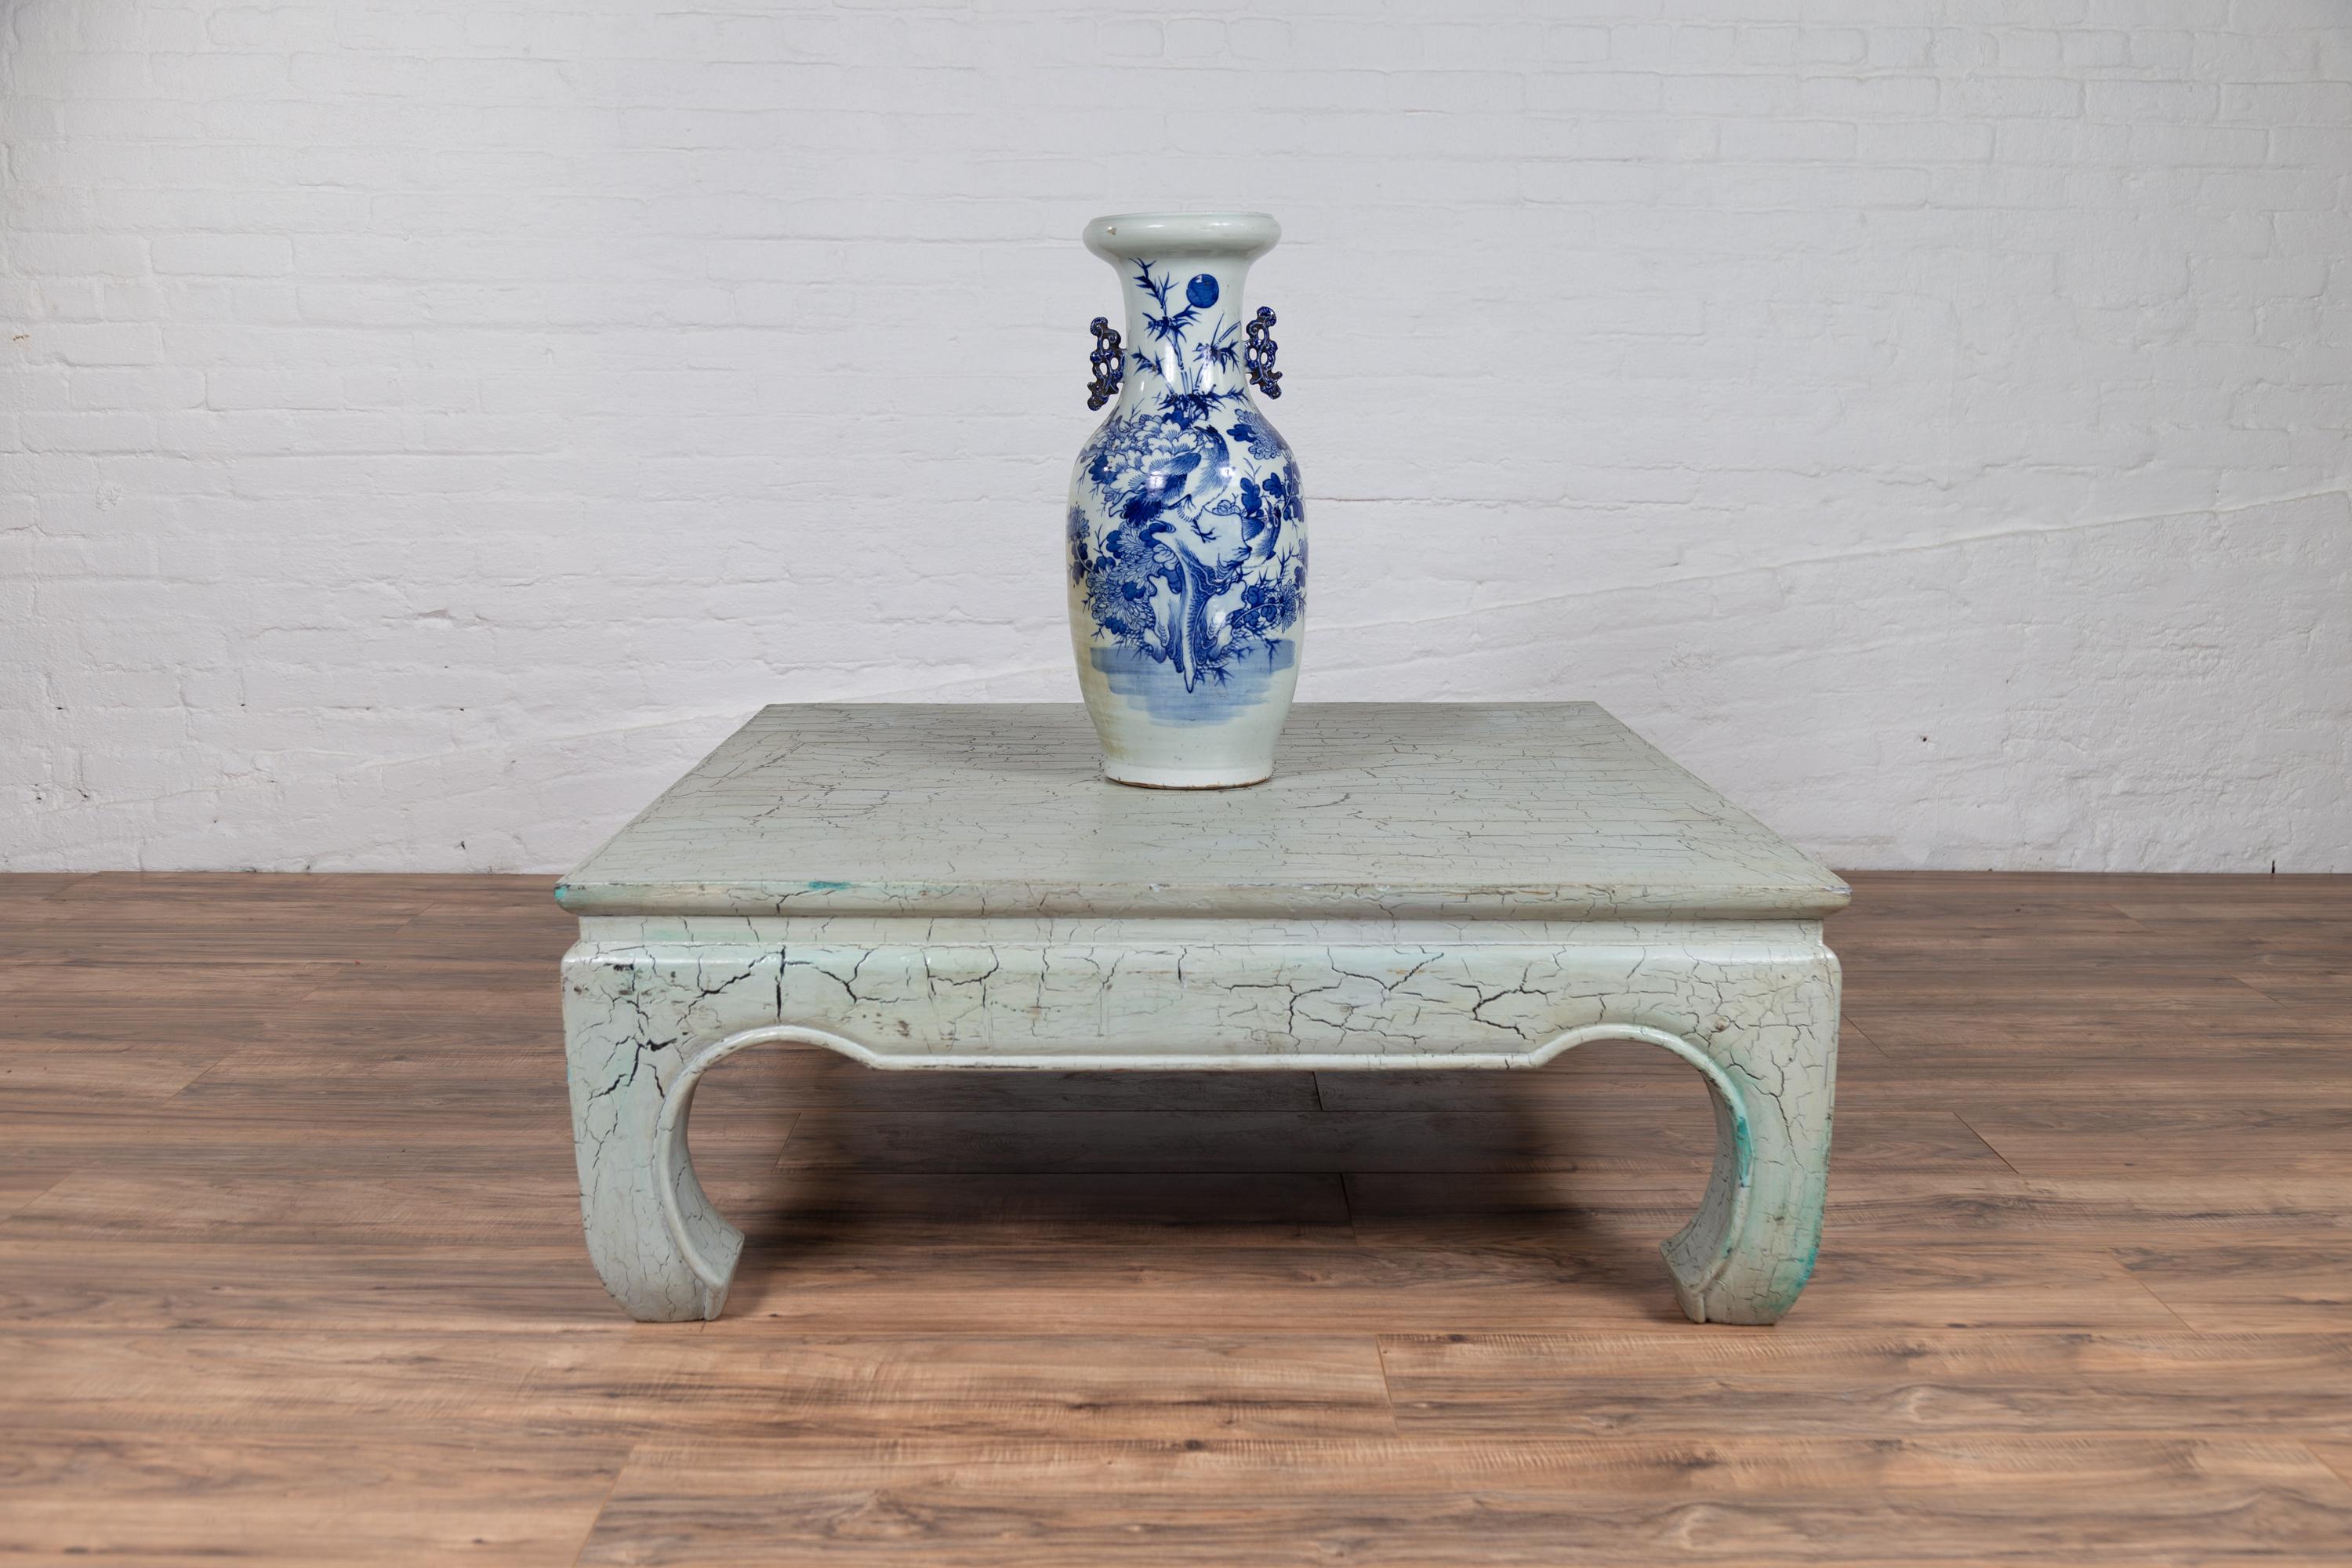 A vintage Ming dynasty style Thai teak wood coffee table from the mid-20th century, with mint green crackled design and chow legs. Born in Thailand during the midcentury period, this stylish teak wood coffee table features an eye-catching green